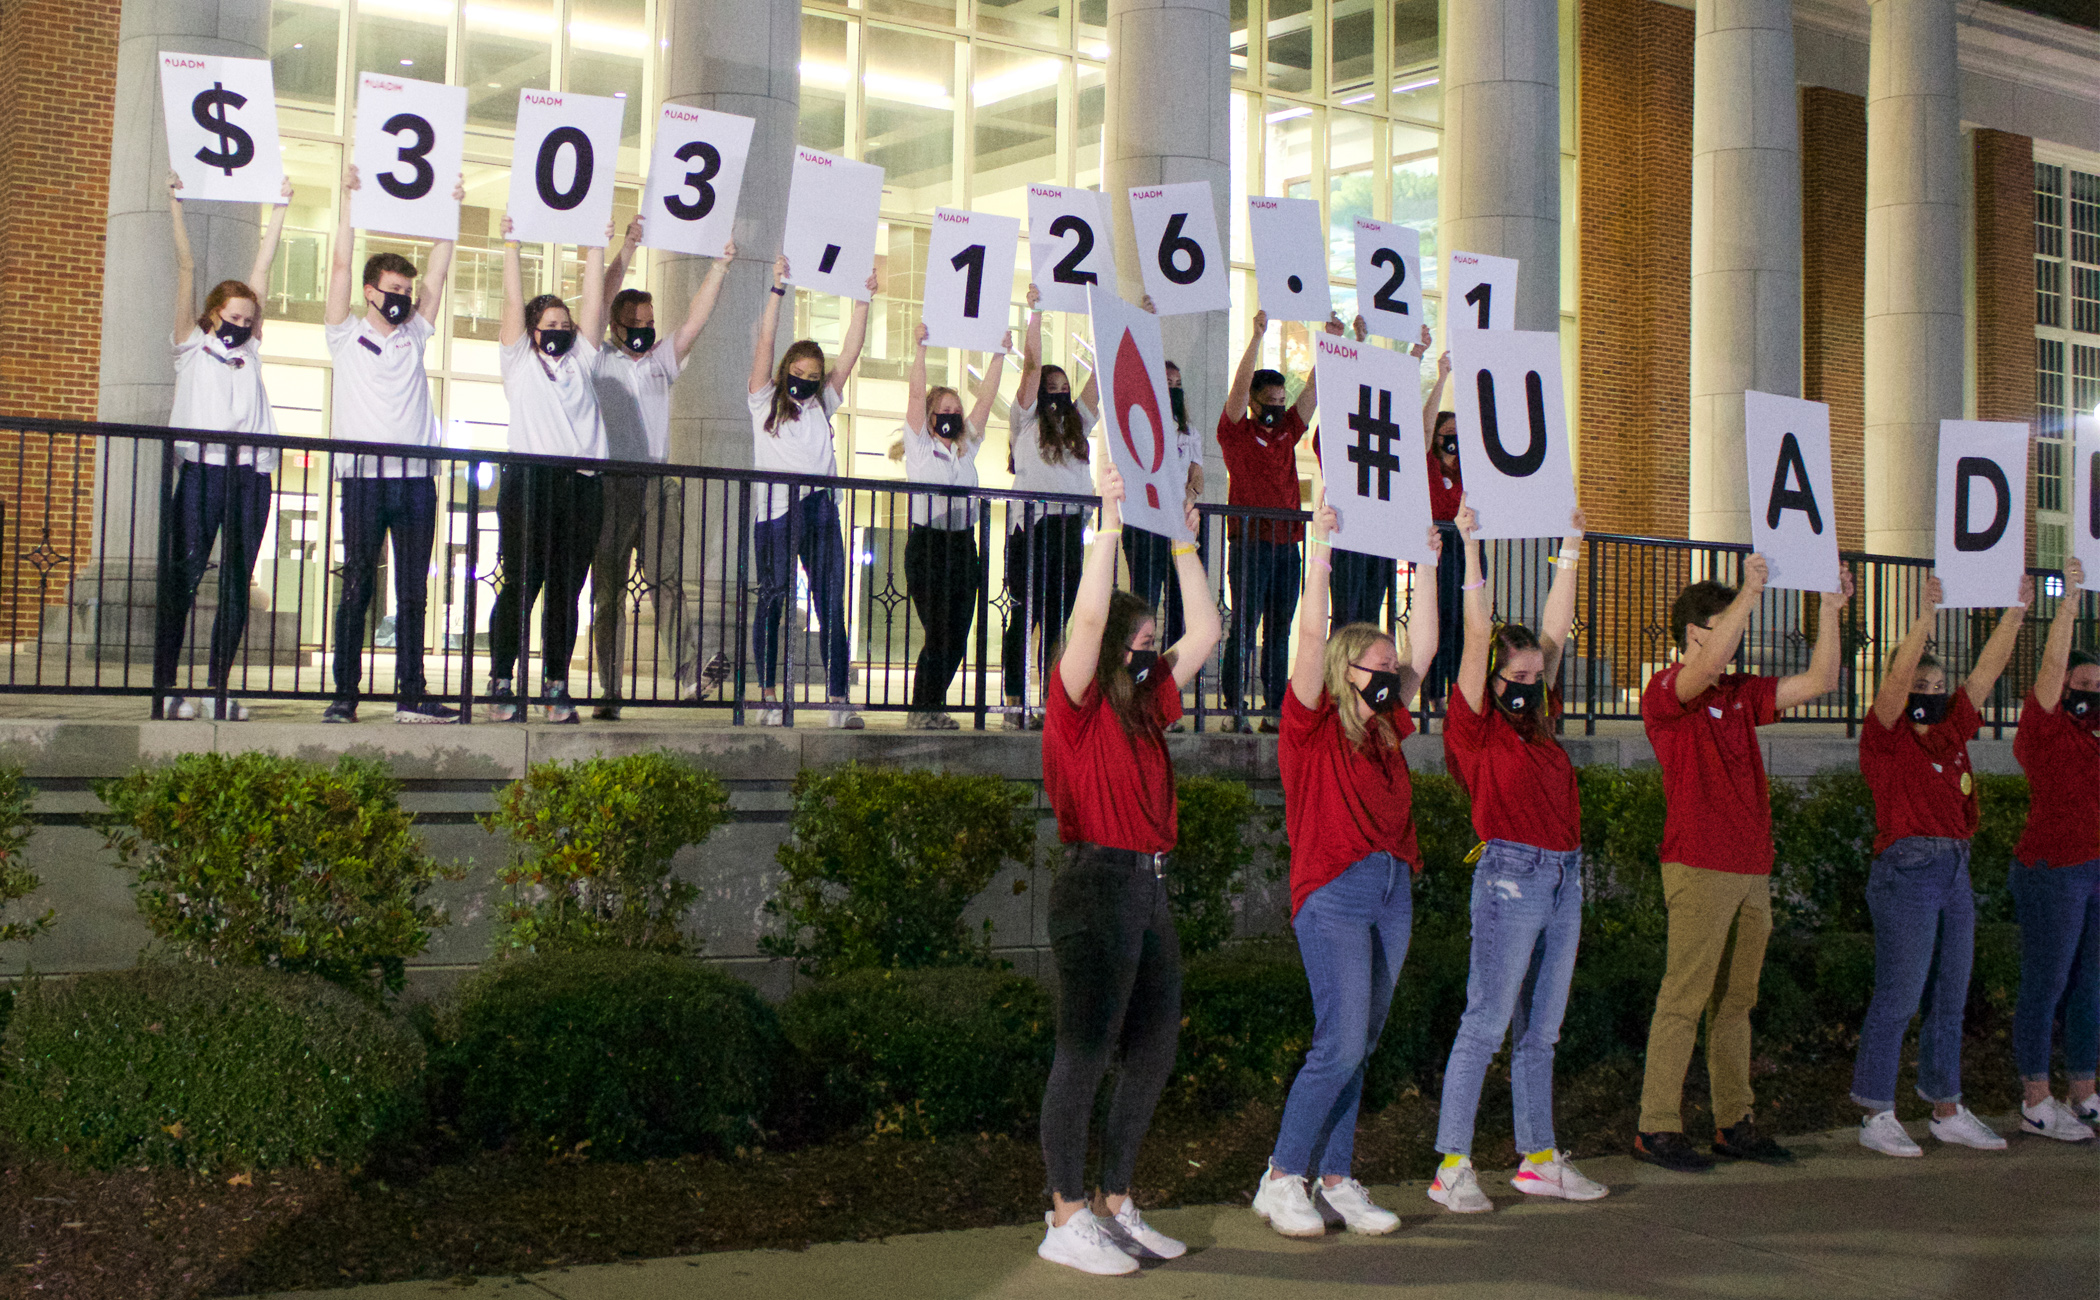 A group of students holding signs that reveal the total of money raised over the past year.